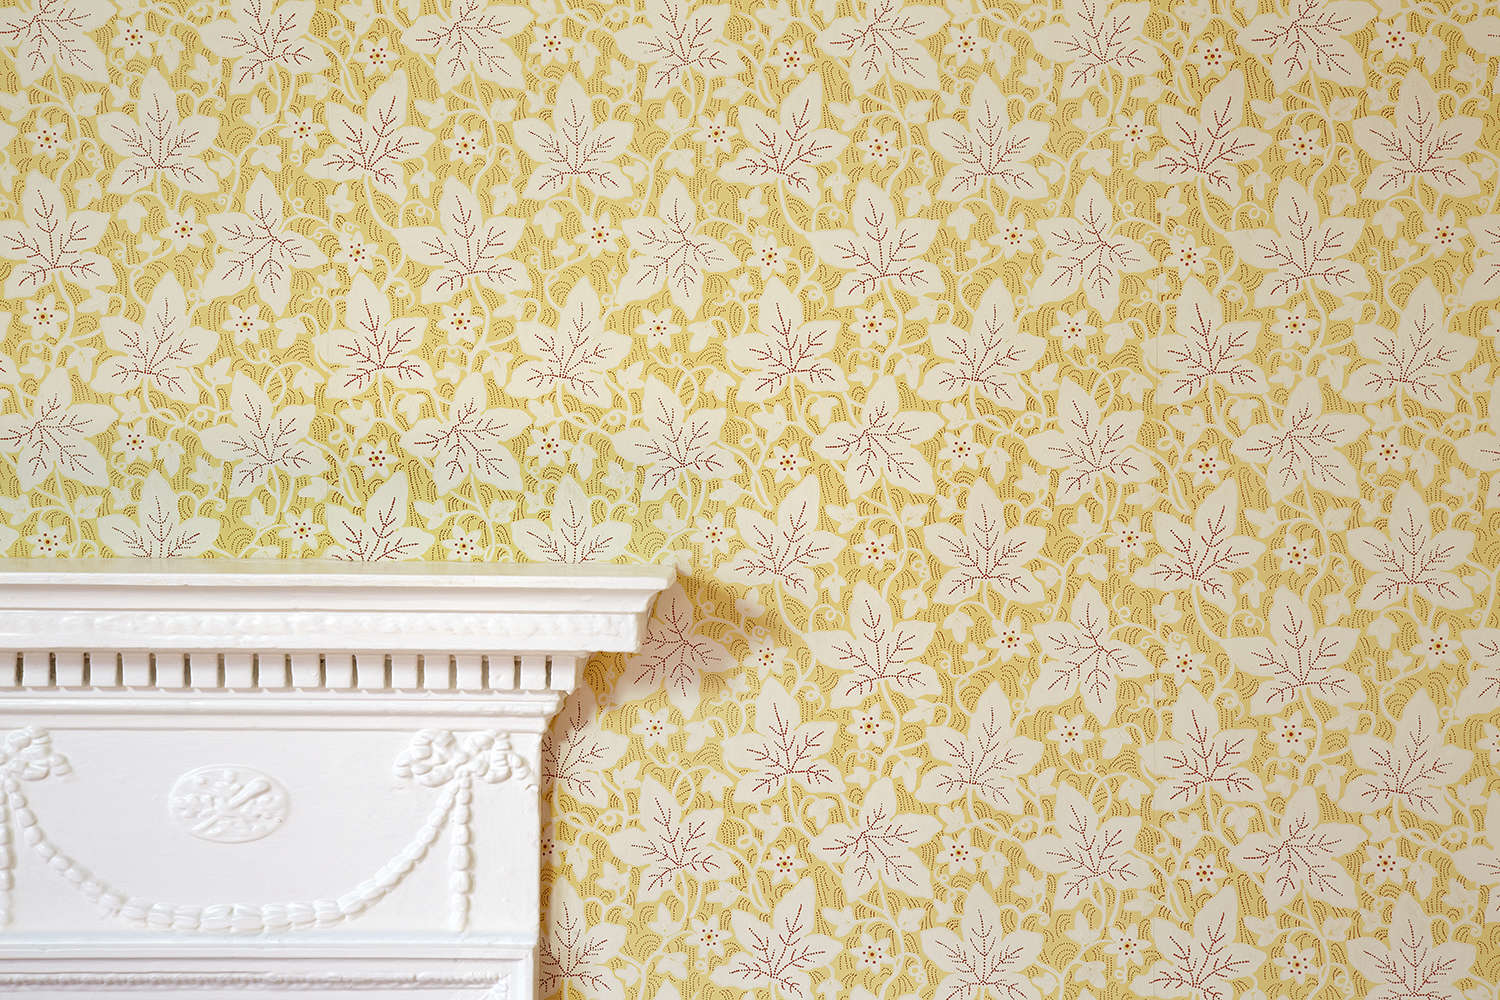 Chawton Vine wallpaper in the Drawing Room at Jane Austen's House